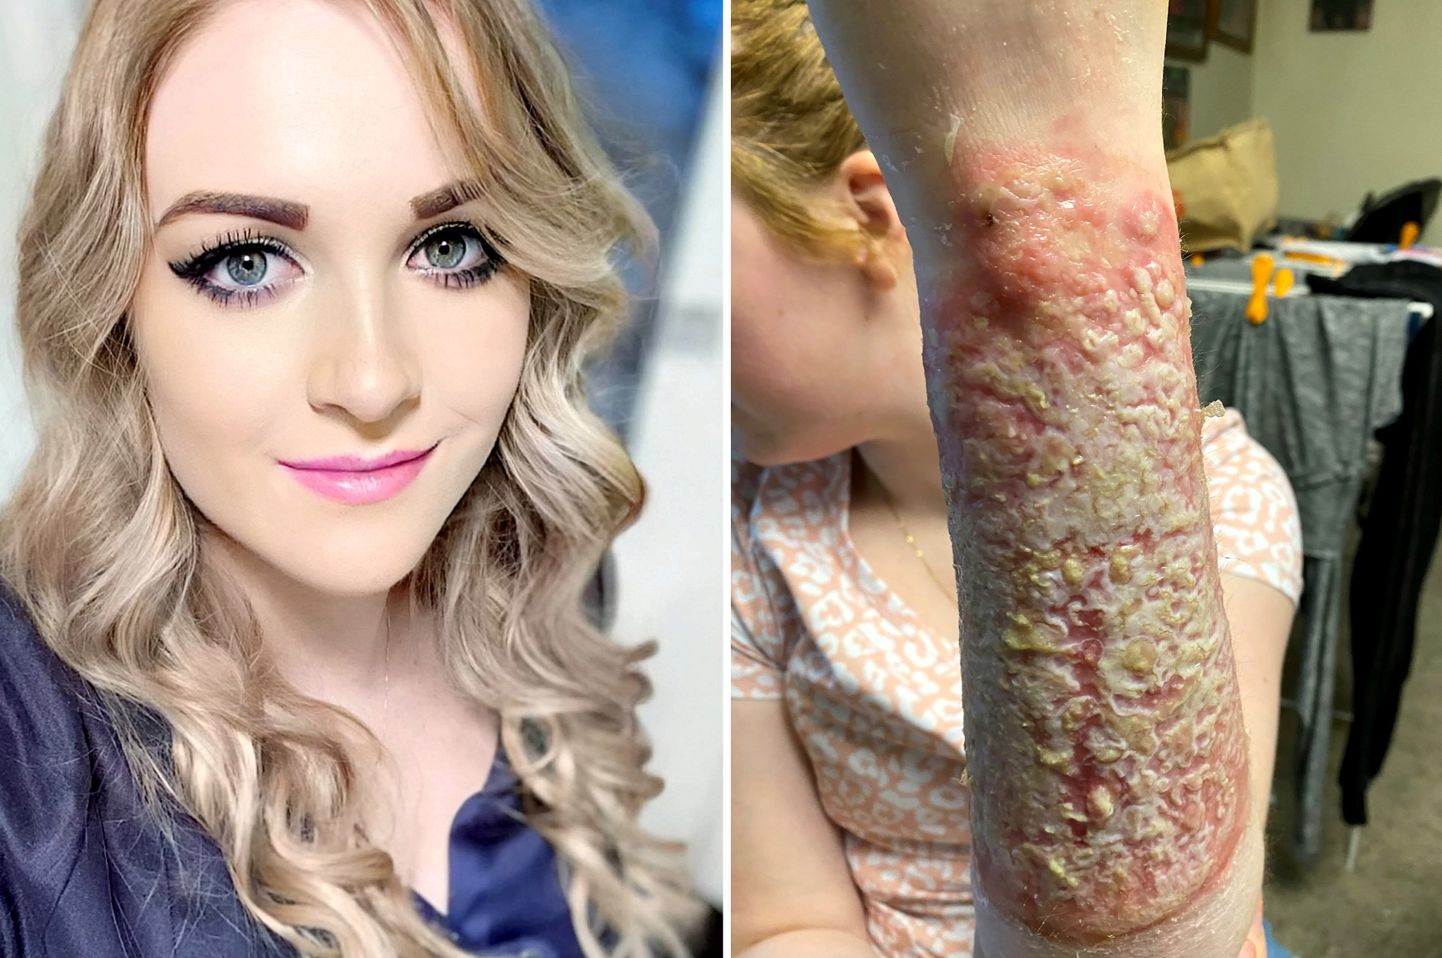 Jenna Allen (L) and her arm (R).  A venomous spider bite has left a mum with $1.3k a WEEK medical bill, unable to hug her kids and at risk of cancer.  See SWNS story SWSMspider.  Jenna Allen, 28, was volunteering in her hometown, Donald, Victoria, Australia, after severe floods ravaged the area in November 2014.  She reached into a box to get a pair of shoes when she was bitten by a highly venomous Redback spider - also known as the Australian black widow - on her left arm.  Instantly her skin reacted, and Jenna had goose bumps up her left arm, stomach cramps and vomiting.  The local hospital didn’t have any antivenom and Jenna had to travel an hour to another hospital - where she was given two doses and admitted to intensive care.  Jenna was transferred to the Bendigo Hospital, Victoria, for two months where she had a skin graft.  This worked for a year but then a mosquito bite sized pinprick resurfaced which burst.  Her unhealed wound now causes her horrendous pain and has to be constantly bandaged.  The dance teacher is petrified she will get cancer as medics have detected pre-cancerous cells in the wound.  Jenna has health insurance provided by medicare but because her condition is so exceptional, not all of the sky-high costs aren't covered.